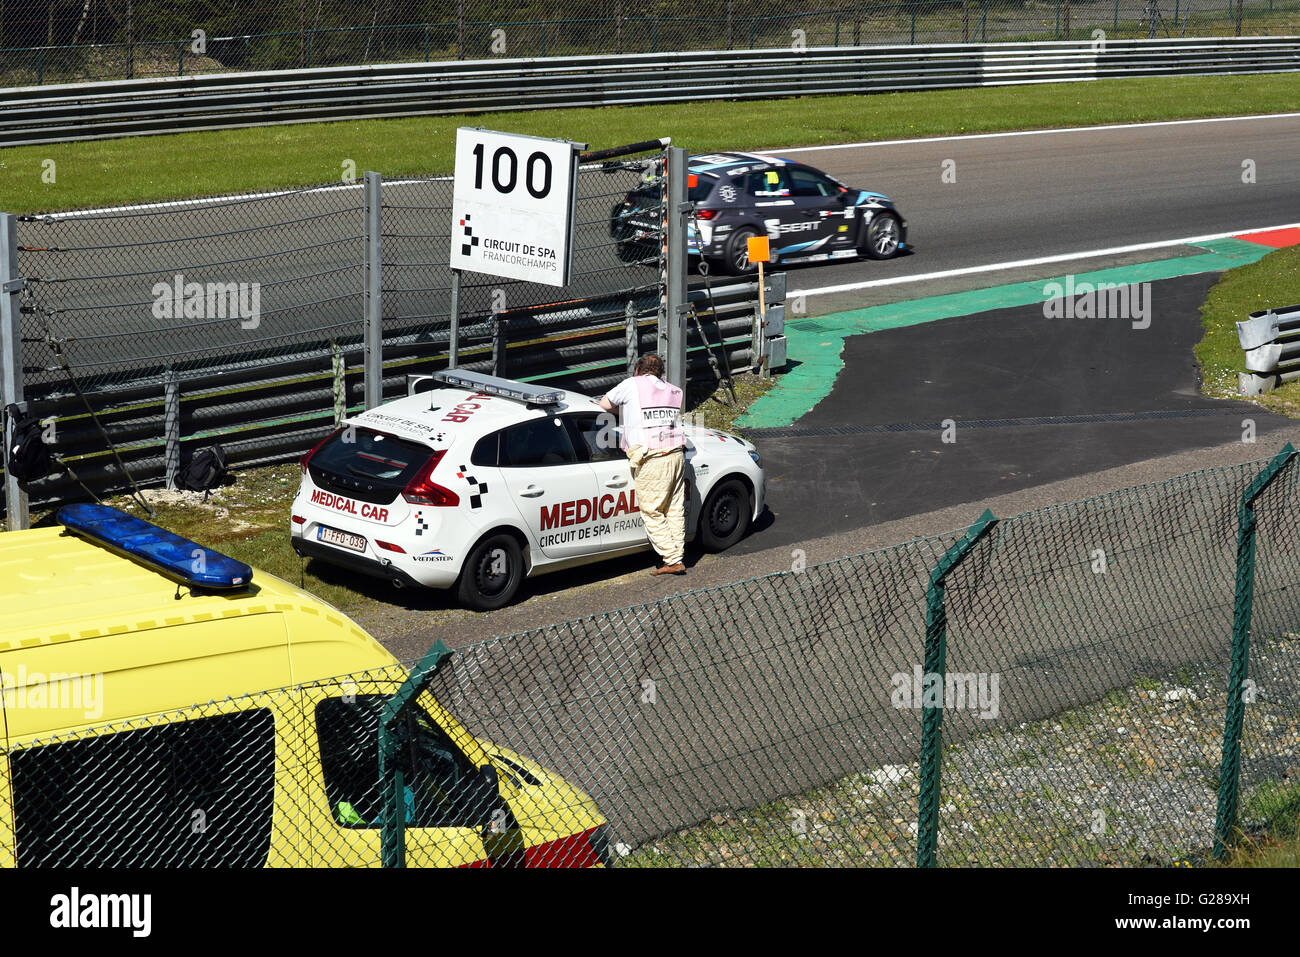 Medical car ready to take action in the event of an accident on Circuit Spa-Francorchamps. Stock Photo